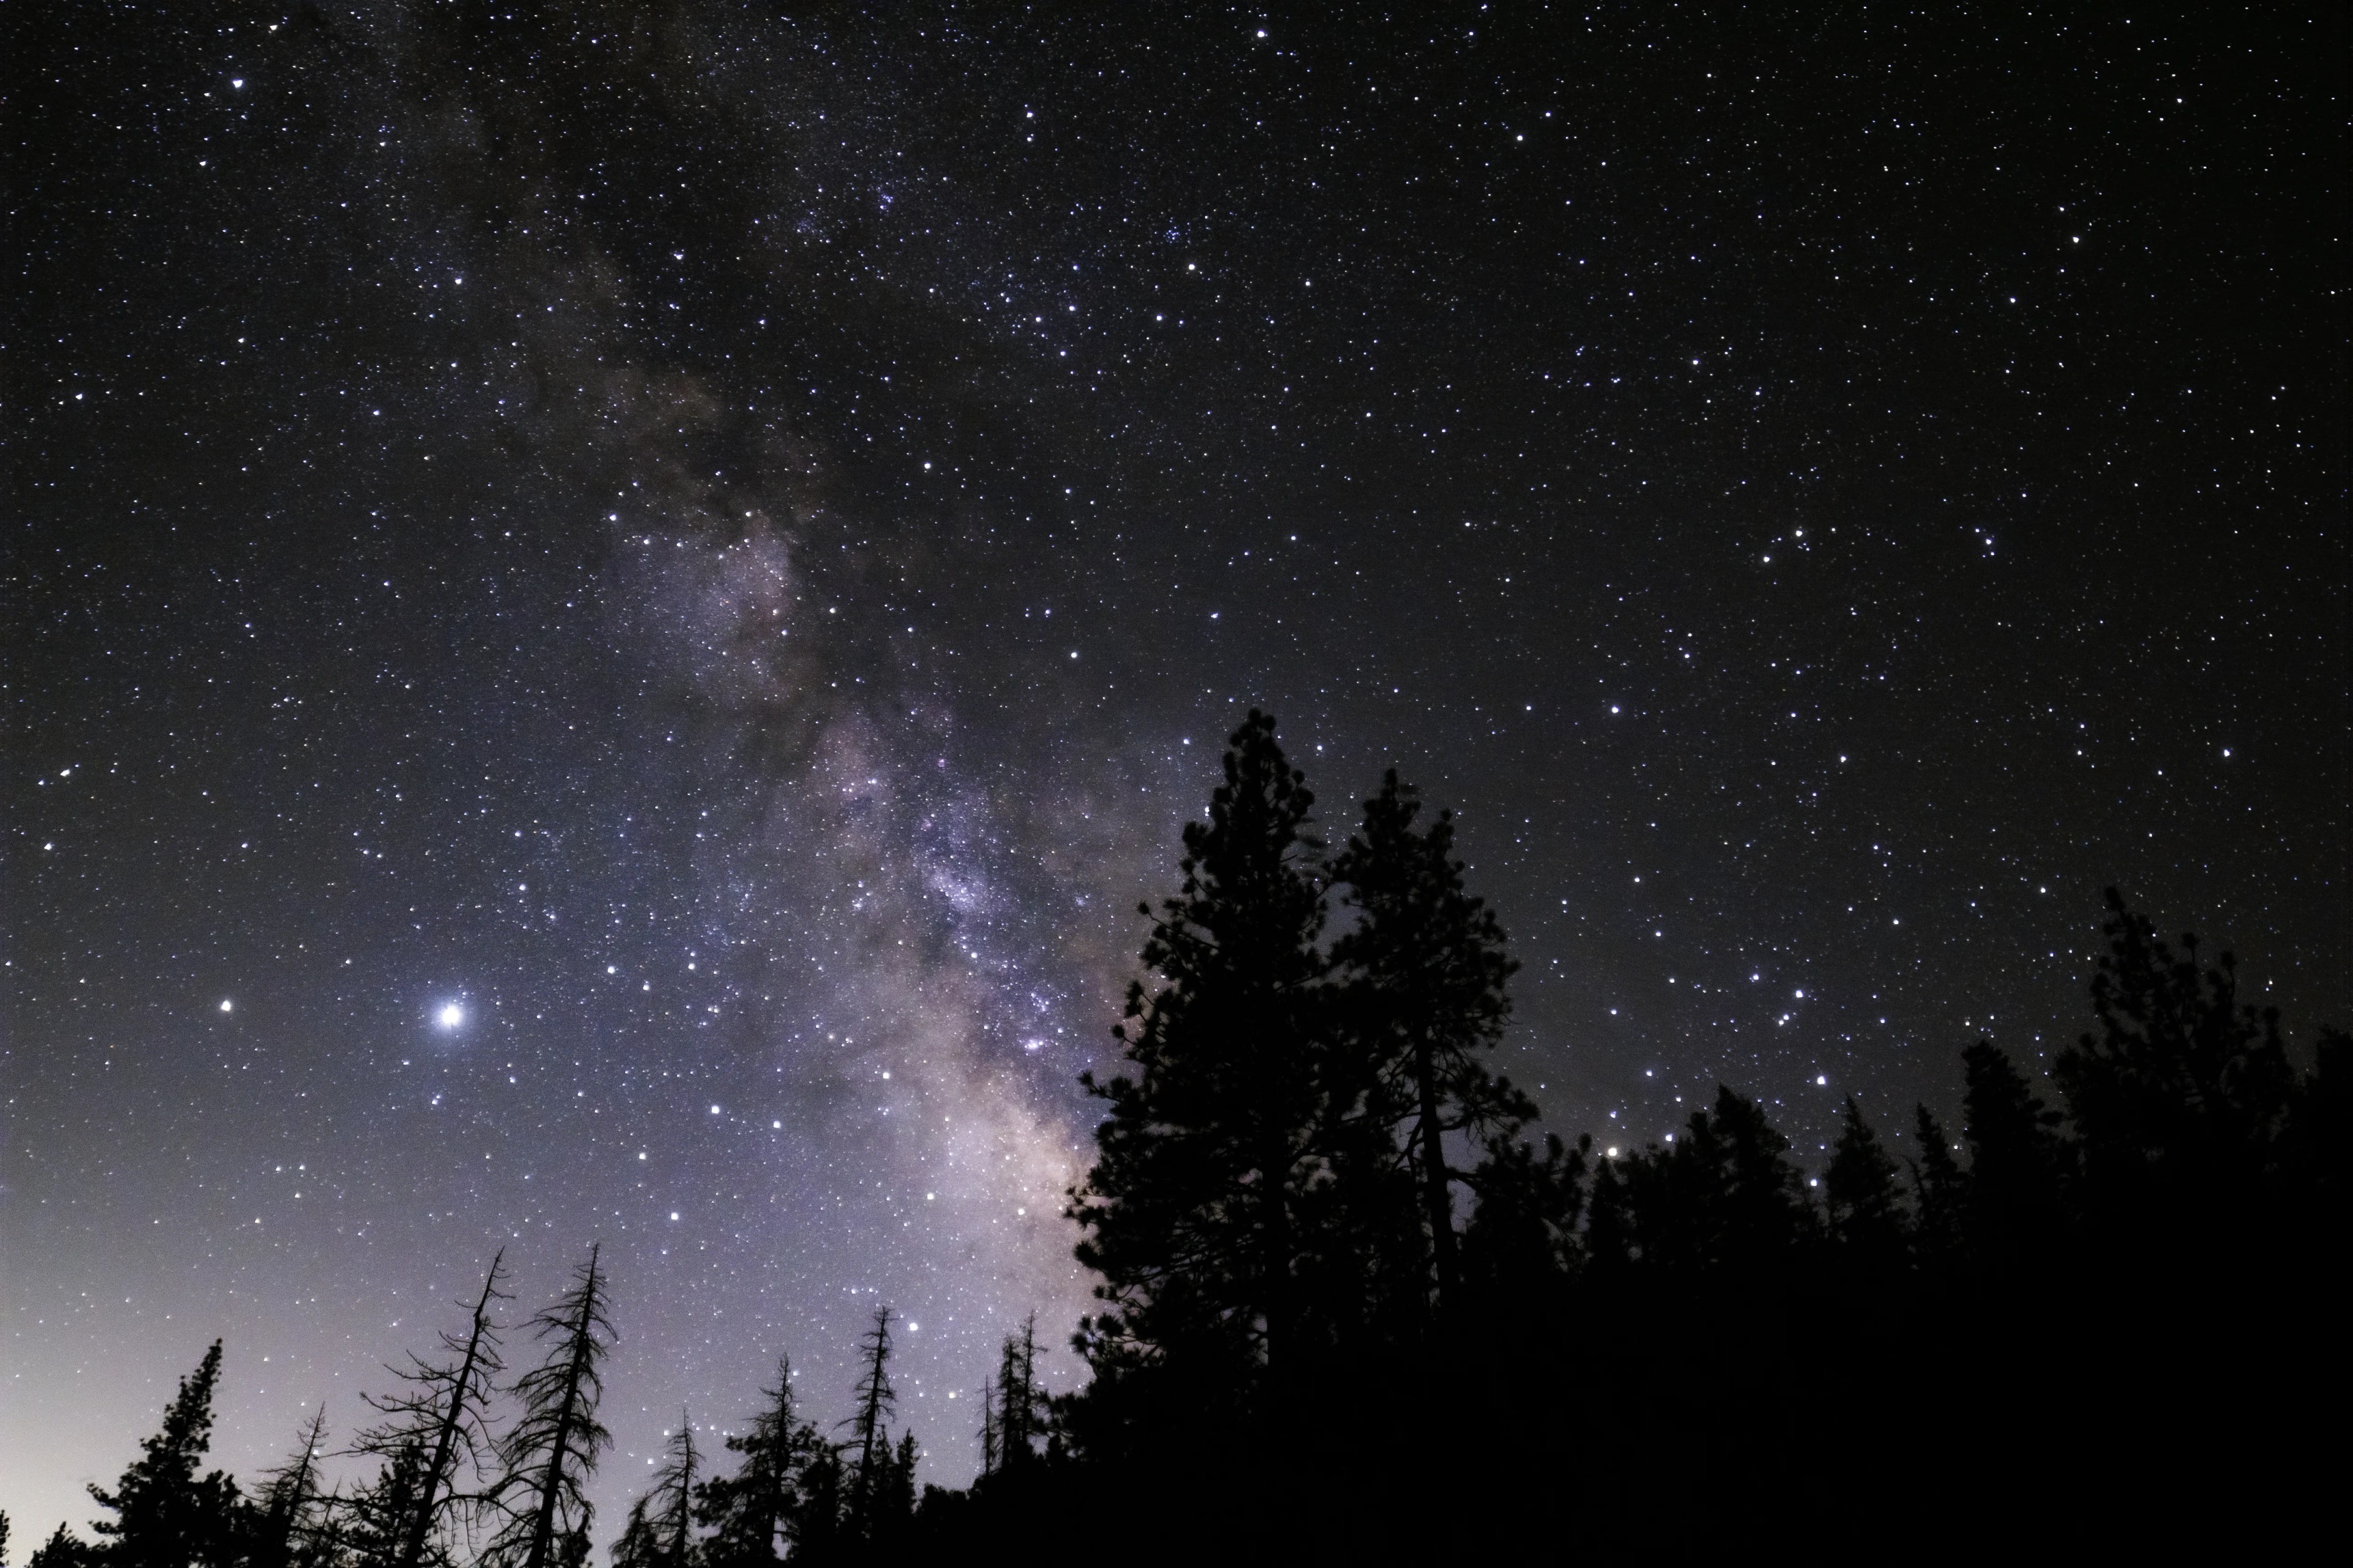 Conifer trees in a forest appear in darkened silhouette against the night sky, where the Milky Way is seen as a diagonal, pink-hued band of light with dark dust clouds.